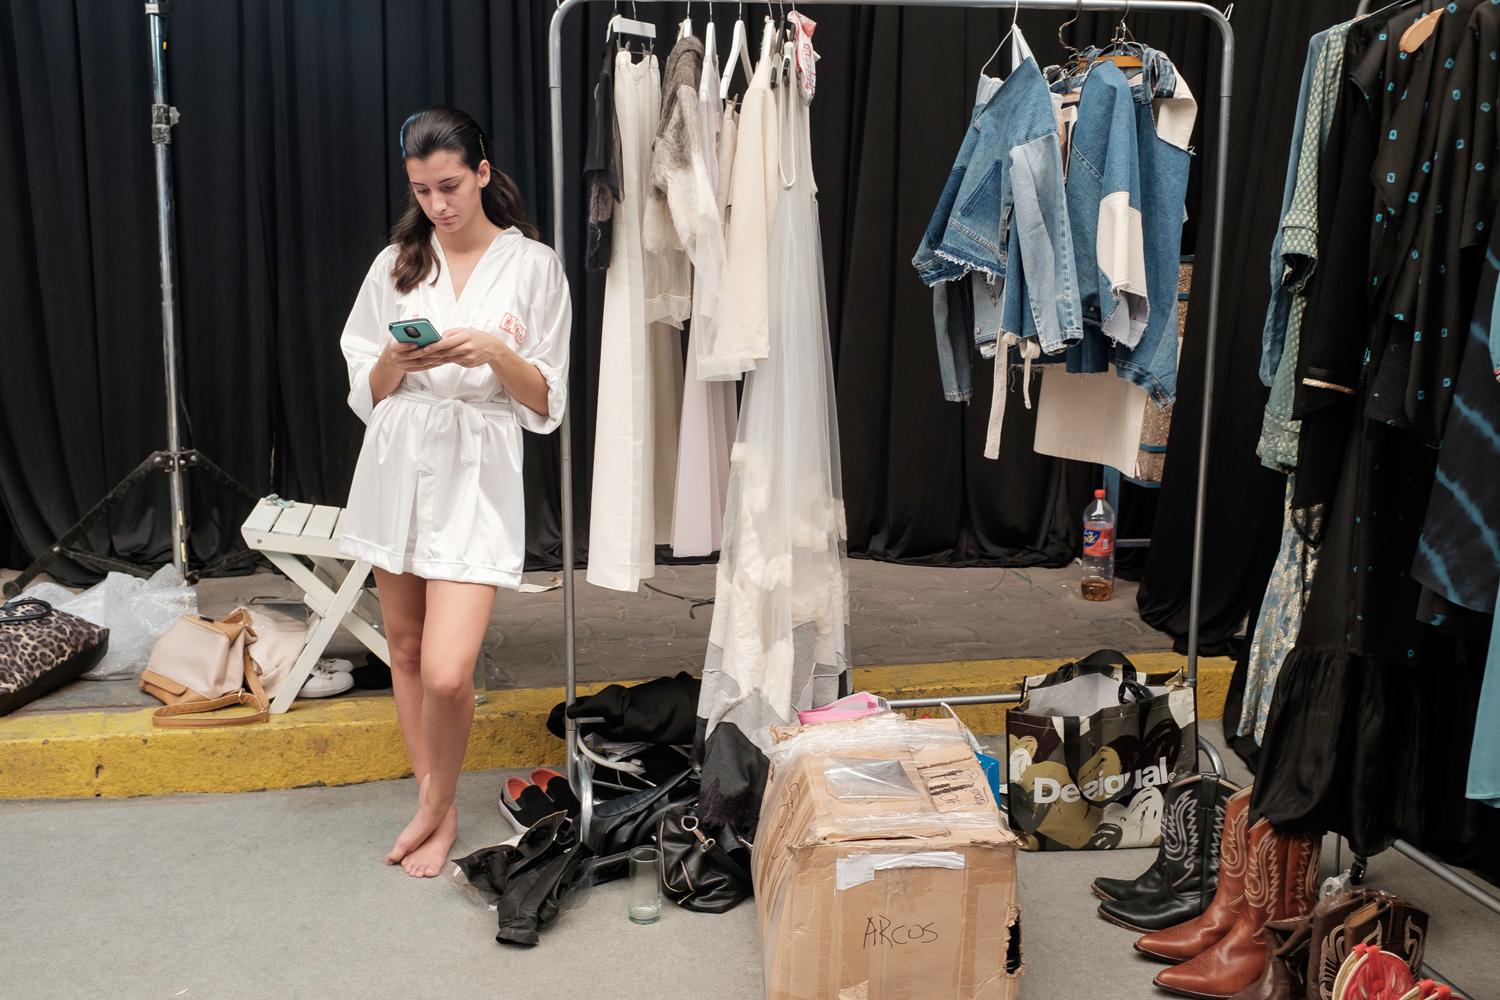 “Waiting for the parade”  – Shooting the backstage of the Caras Moda fashion show with the Fuji X100T